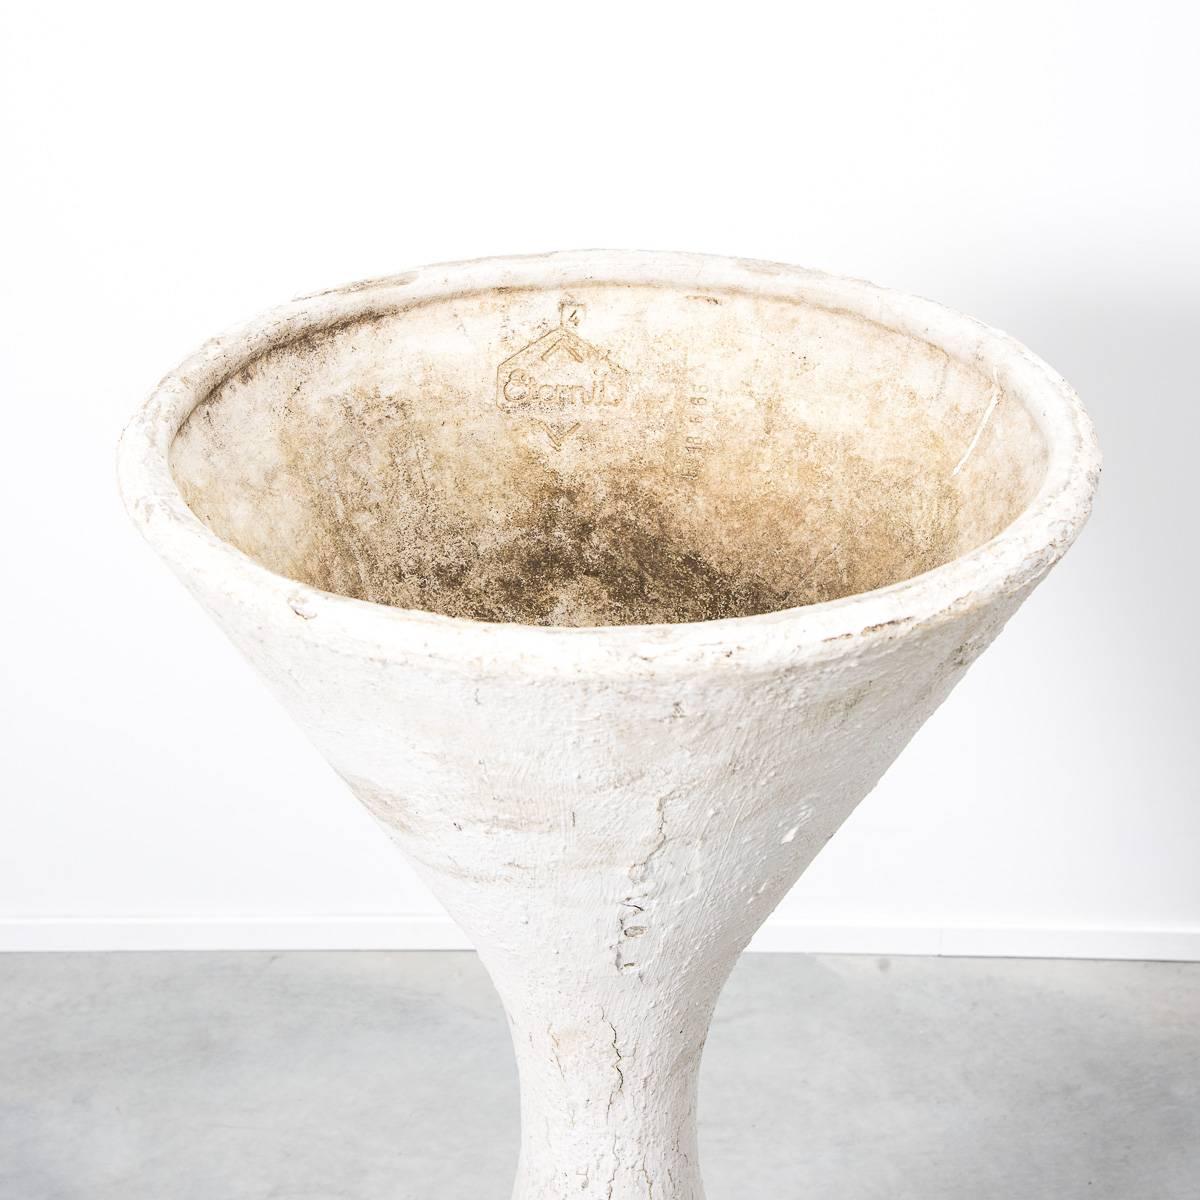 This is the largest edition of Willy Guhl’s diabolo planters, a pioneering example of industrial design. Designed in Switzerland in the 1950s for Eternit. An elegant piece of abstracted sculpture cast from fibrates cement. Complete with Eternit